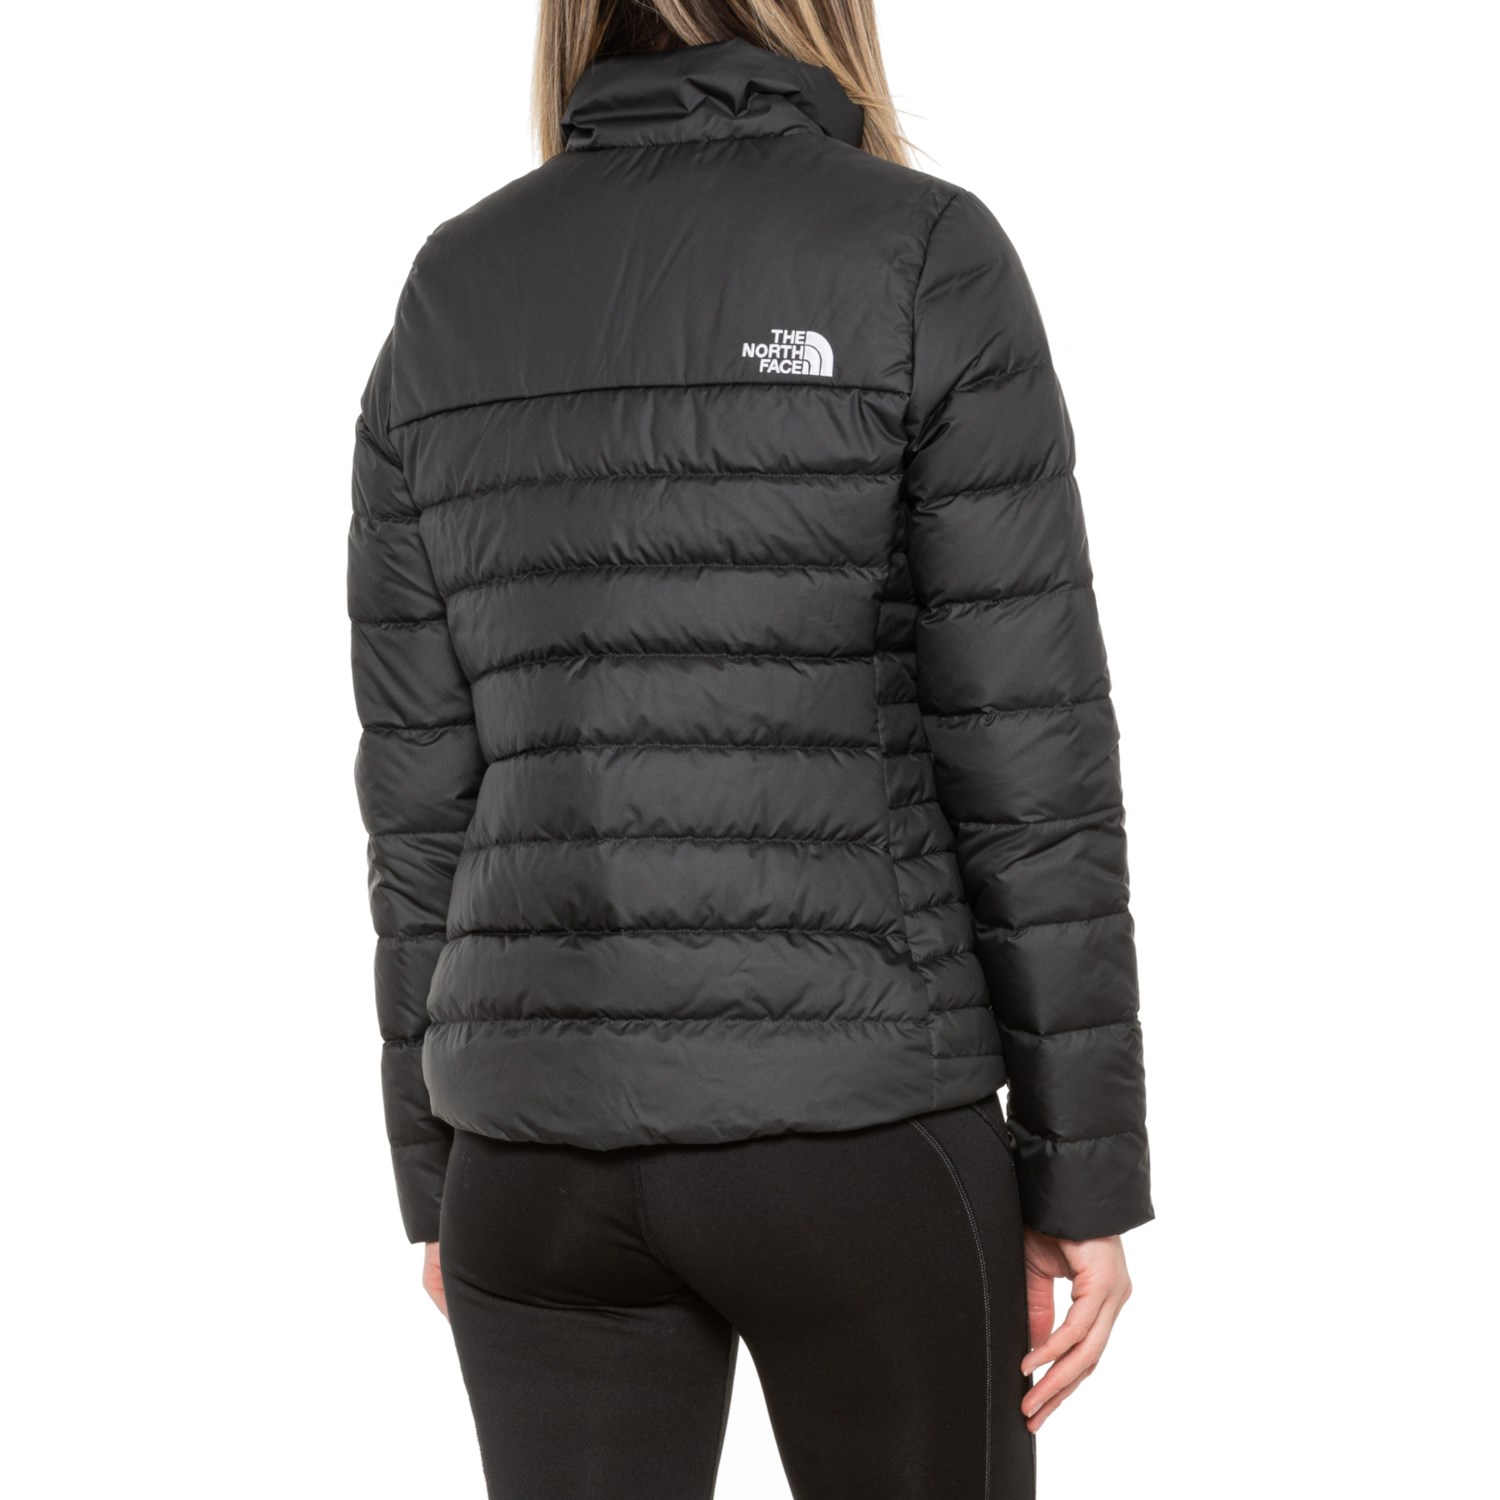 The North Face LDS Down Full Zip Jacket - Insulated